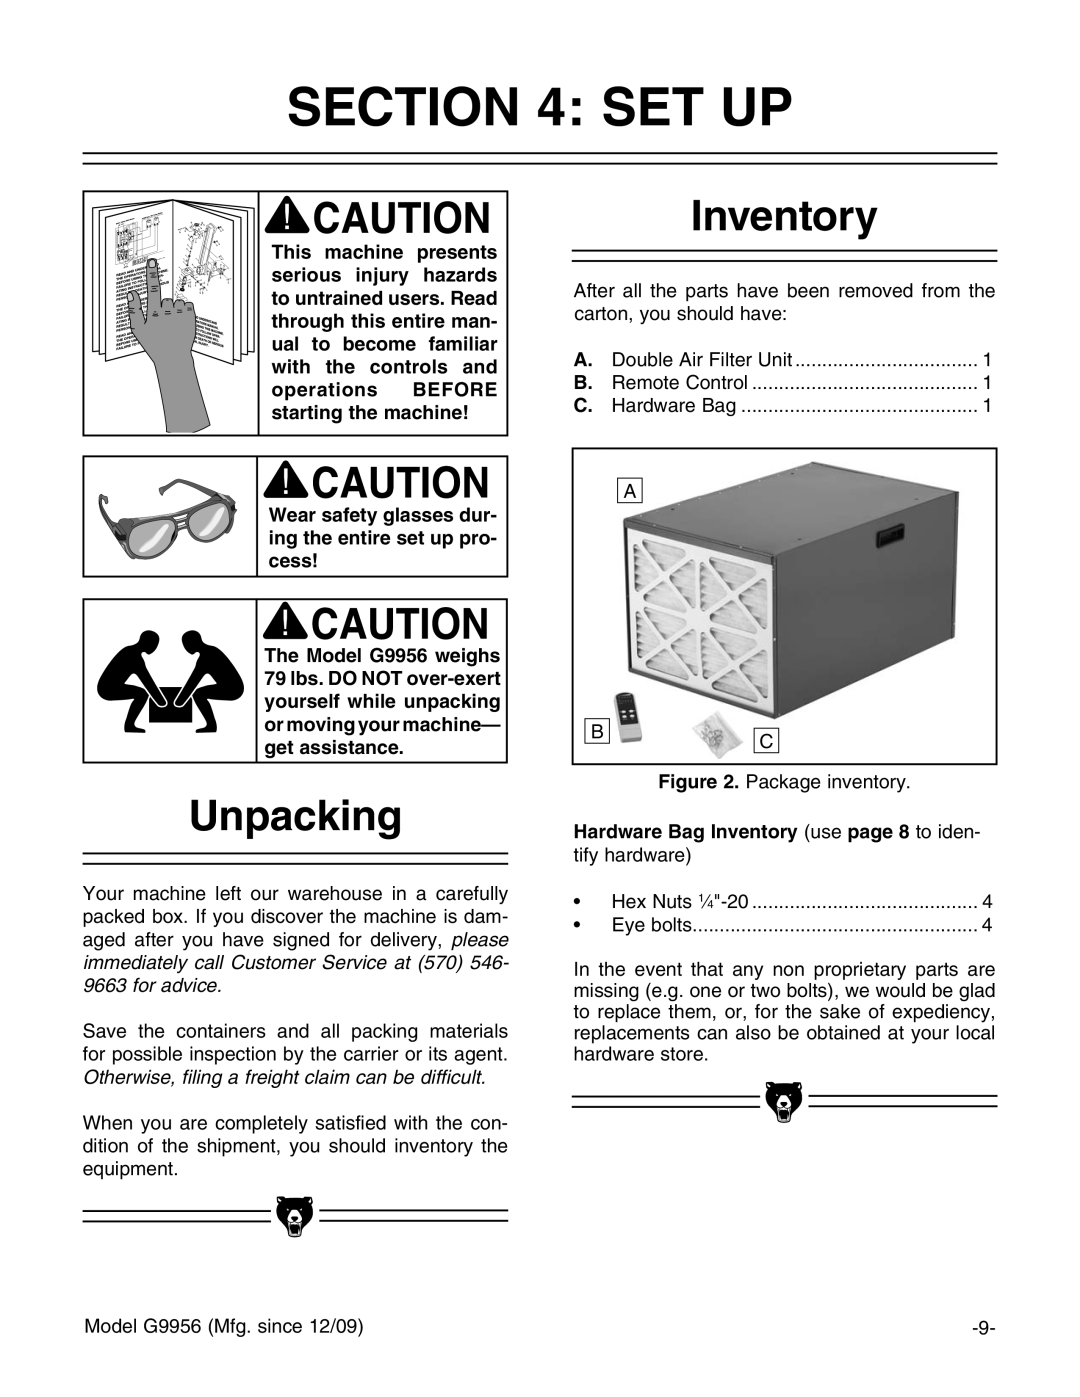 Grizzly G9956 instruction manual Set Up, Unpacking, Inventory 